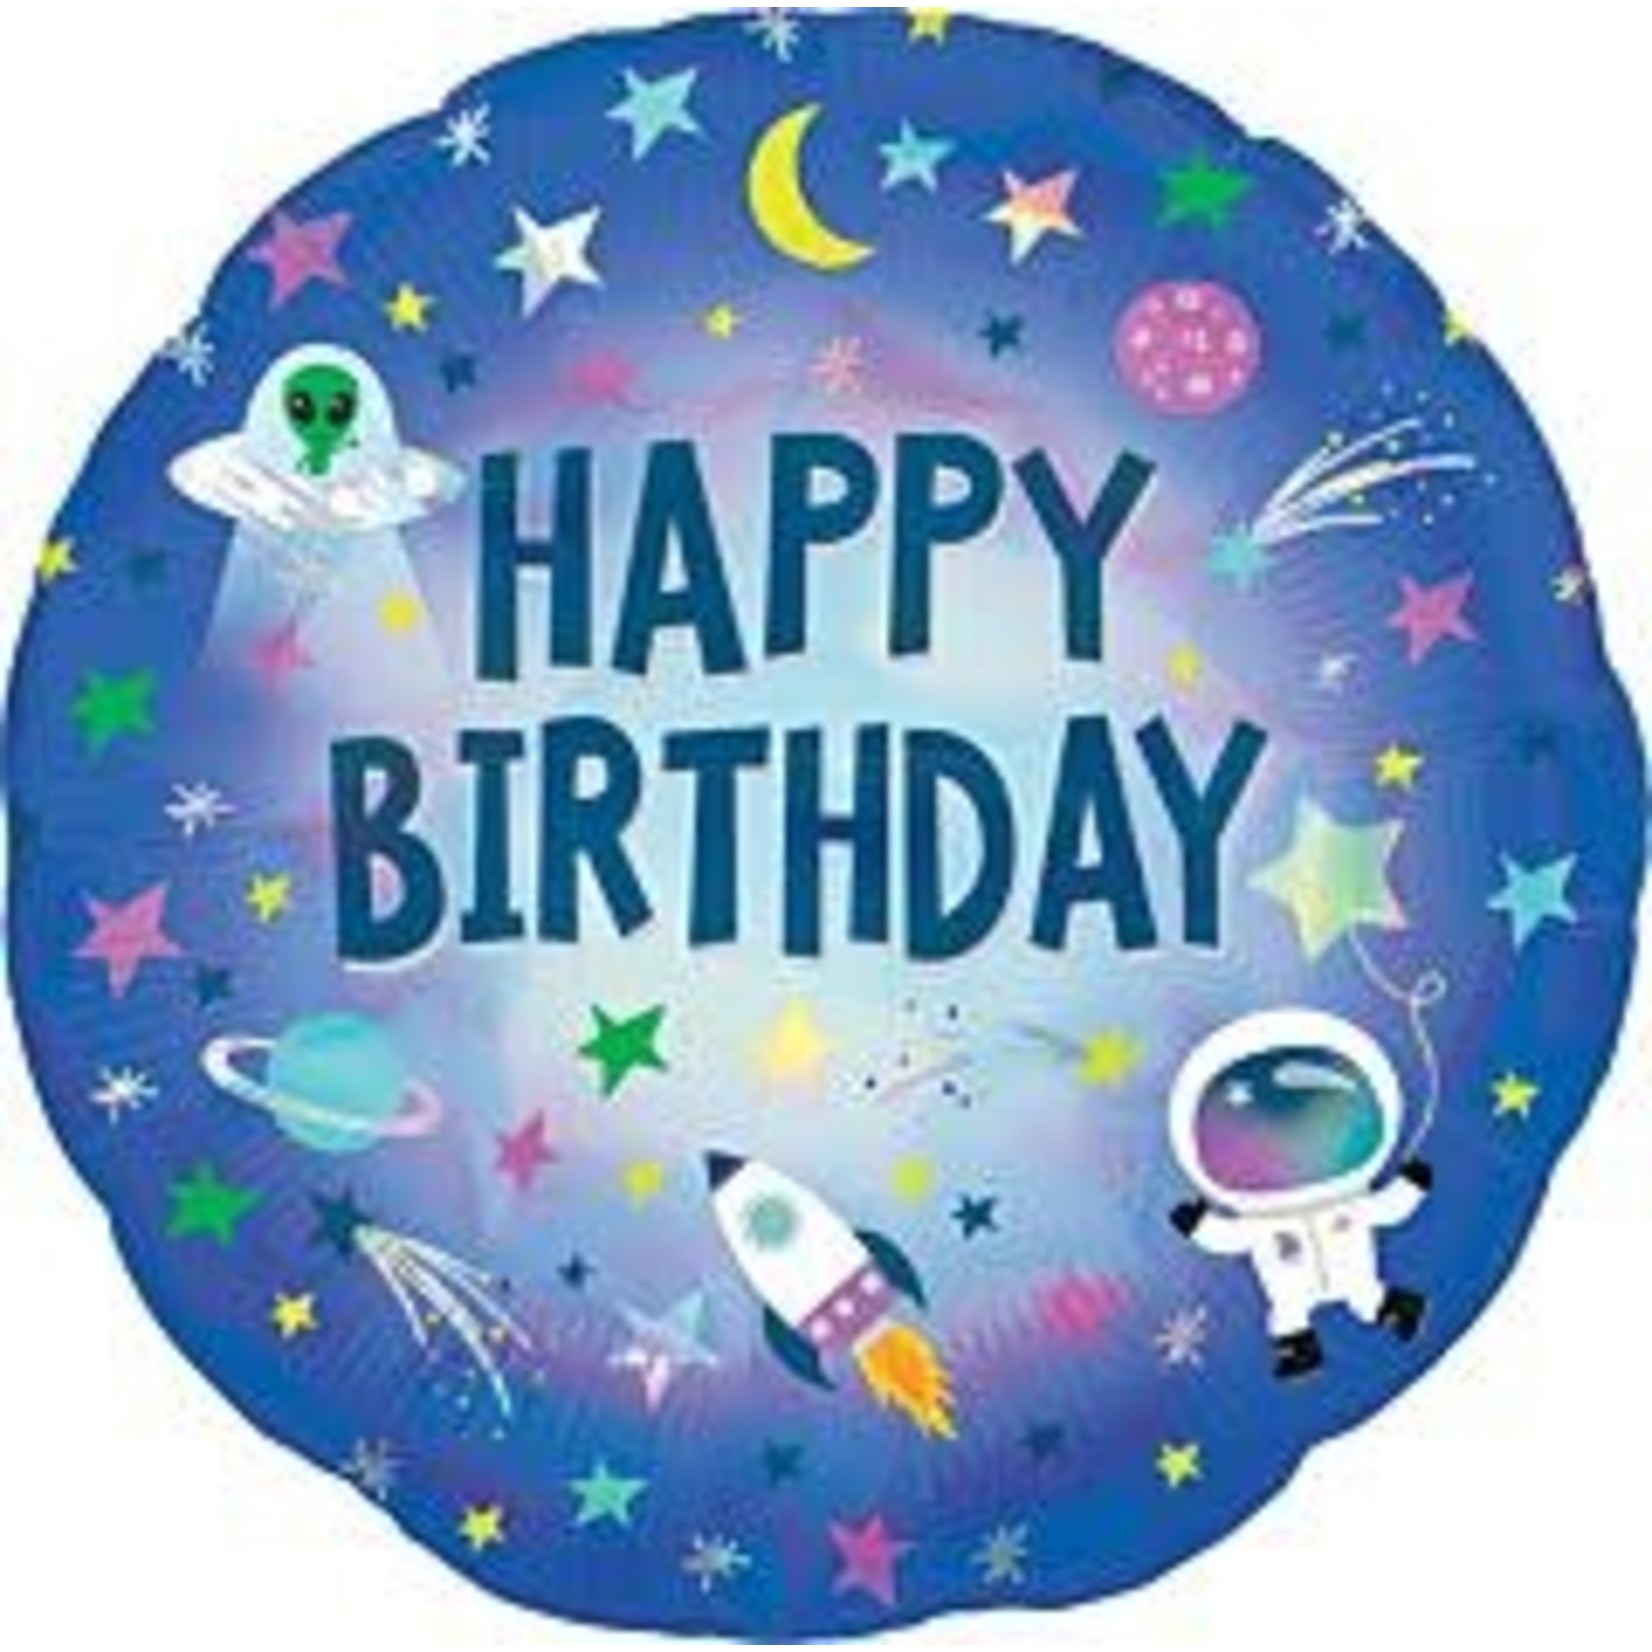 Anagram 18" Happy Bday Outer Space Balloon